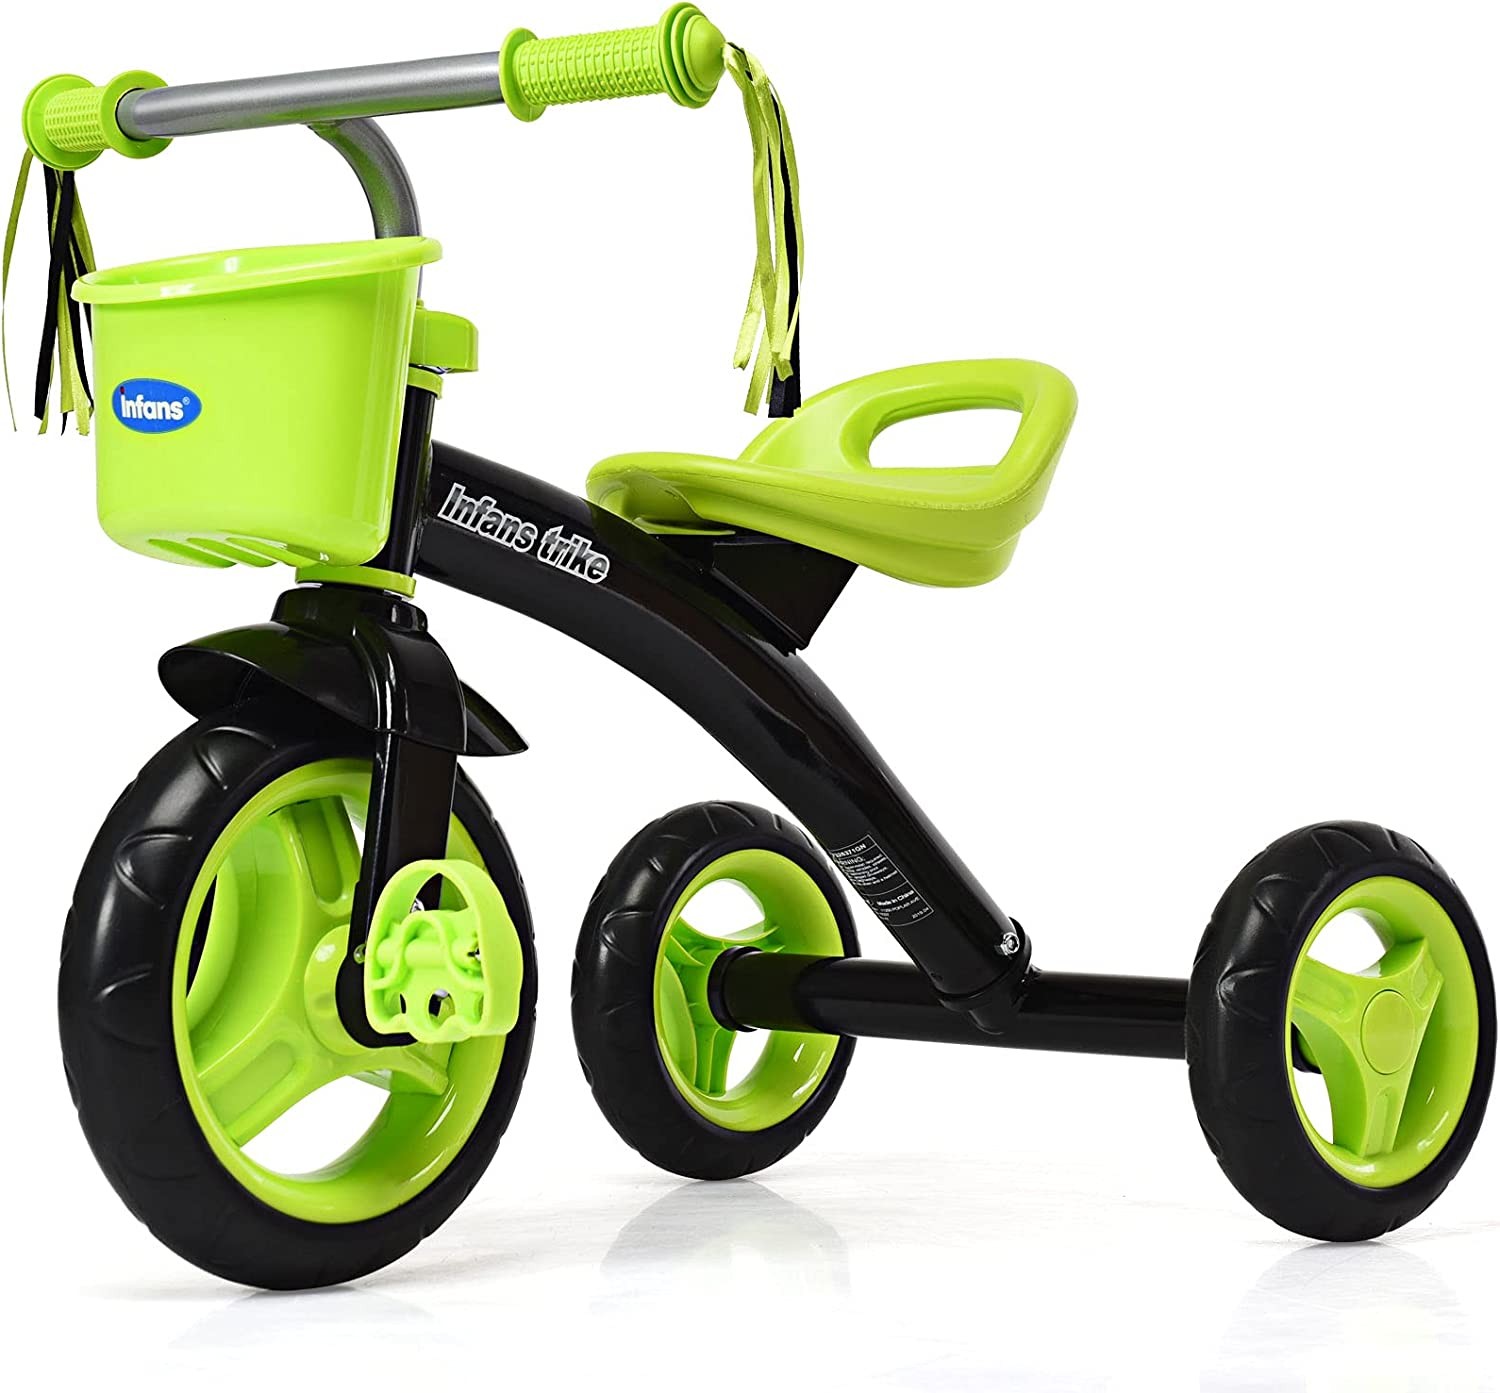 Kid's Tricycle - color and design may vary